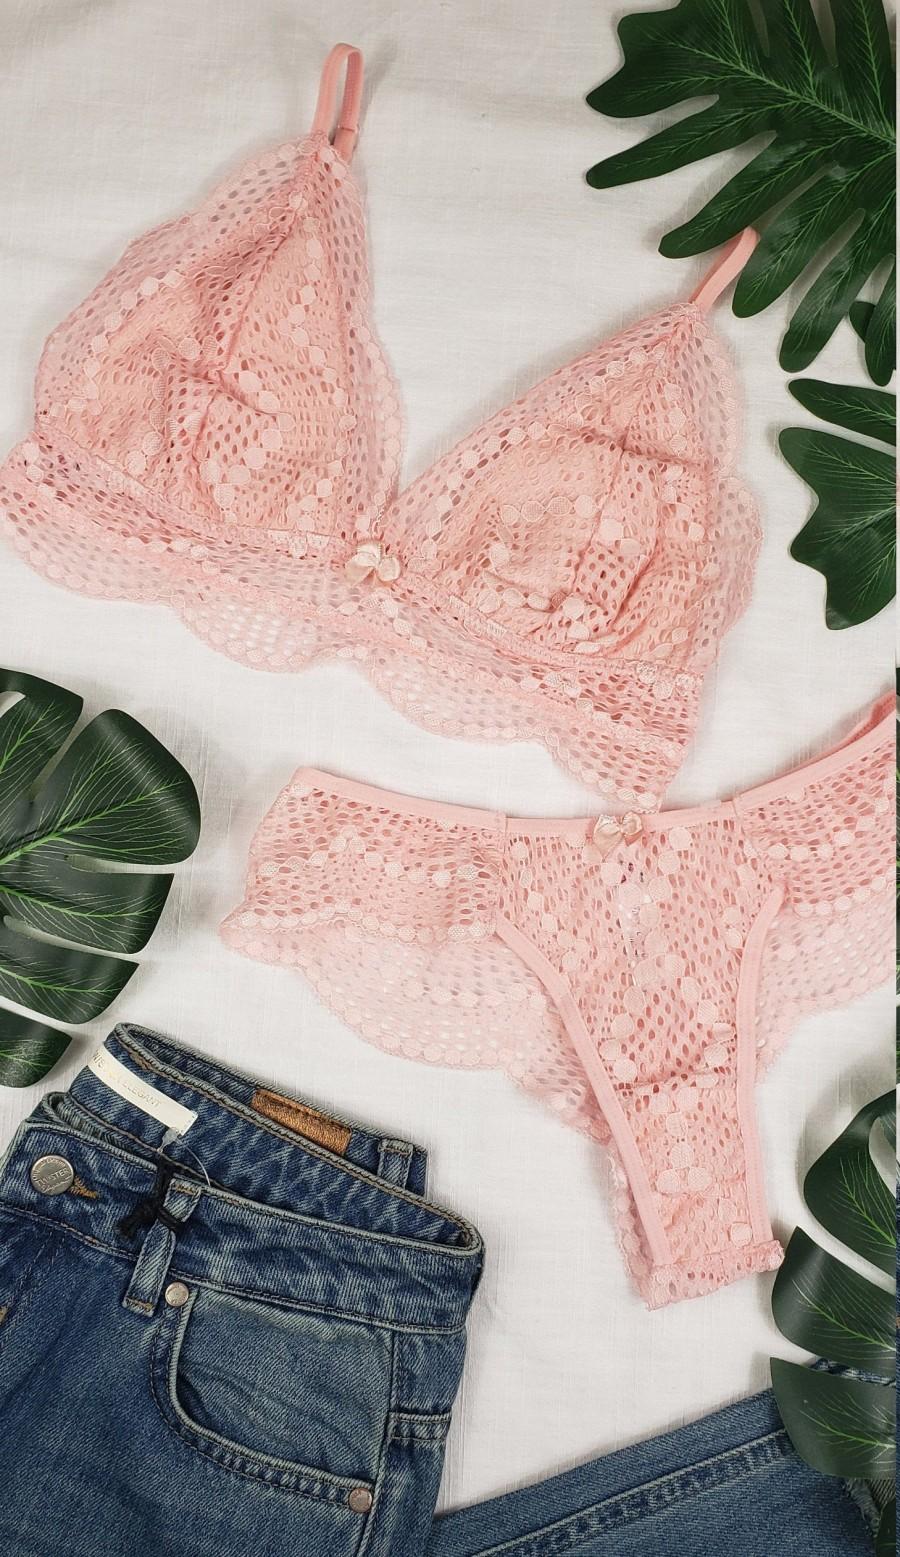 Wedding - Triangle Lace Bralette brief SET lace bralette floral lace bralette with thong lace top bra top sheer lace bralette scalloped lace Crochet